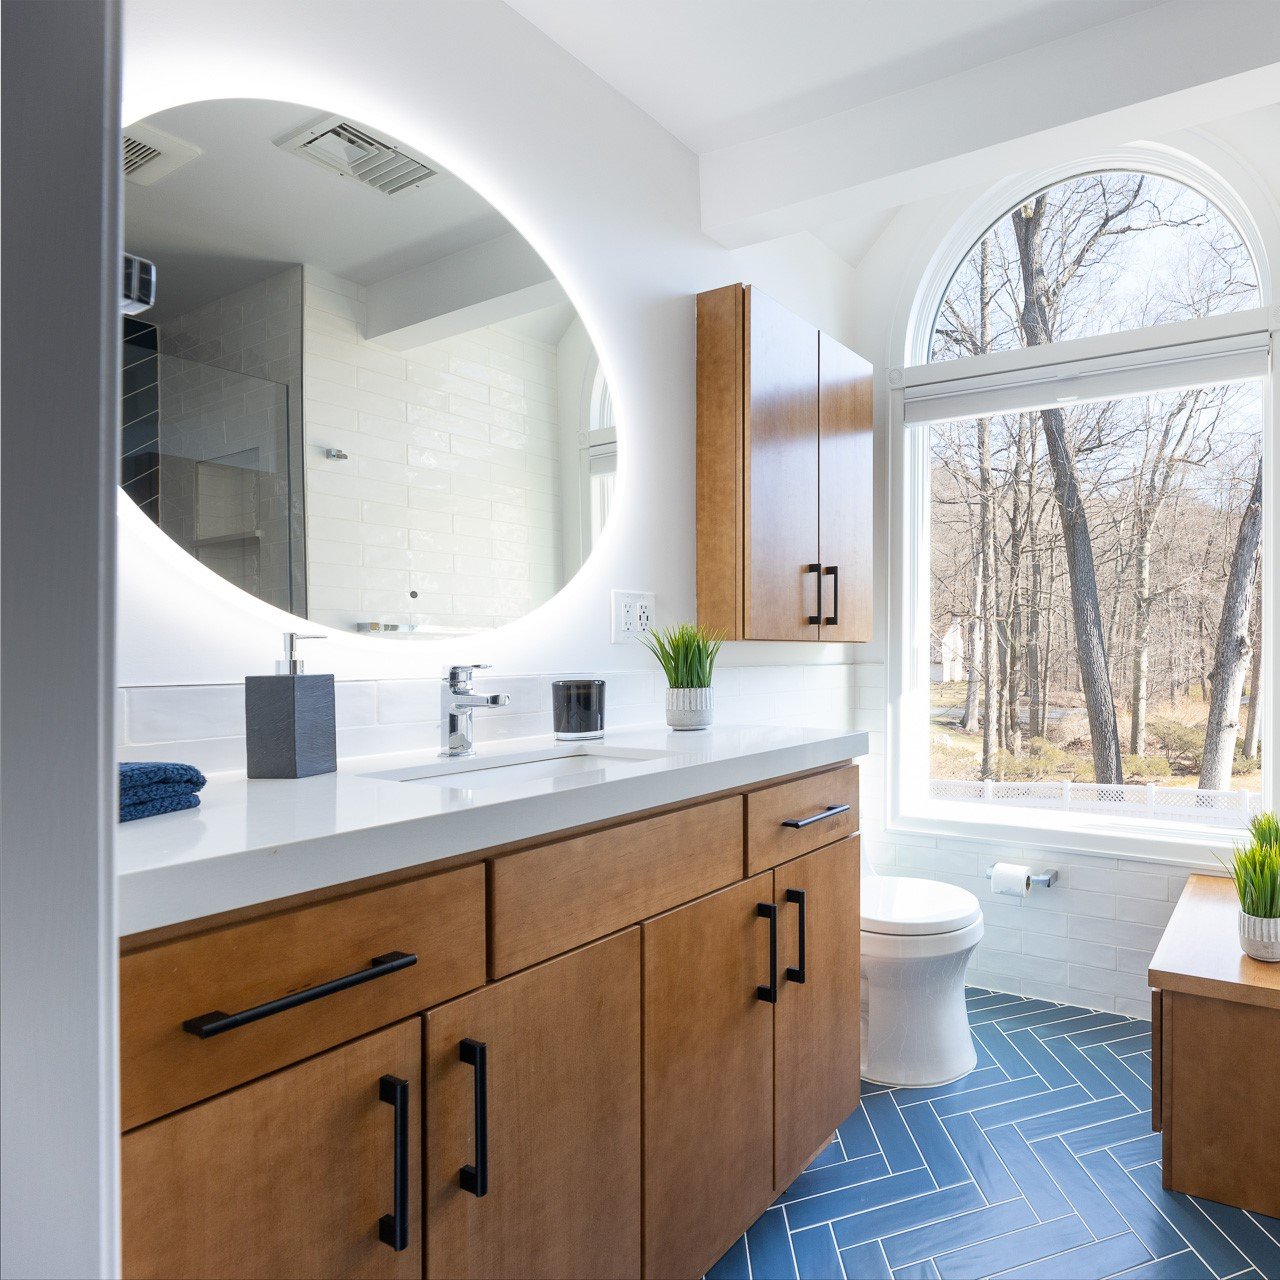 A Byram Bathroom Remodeling Project